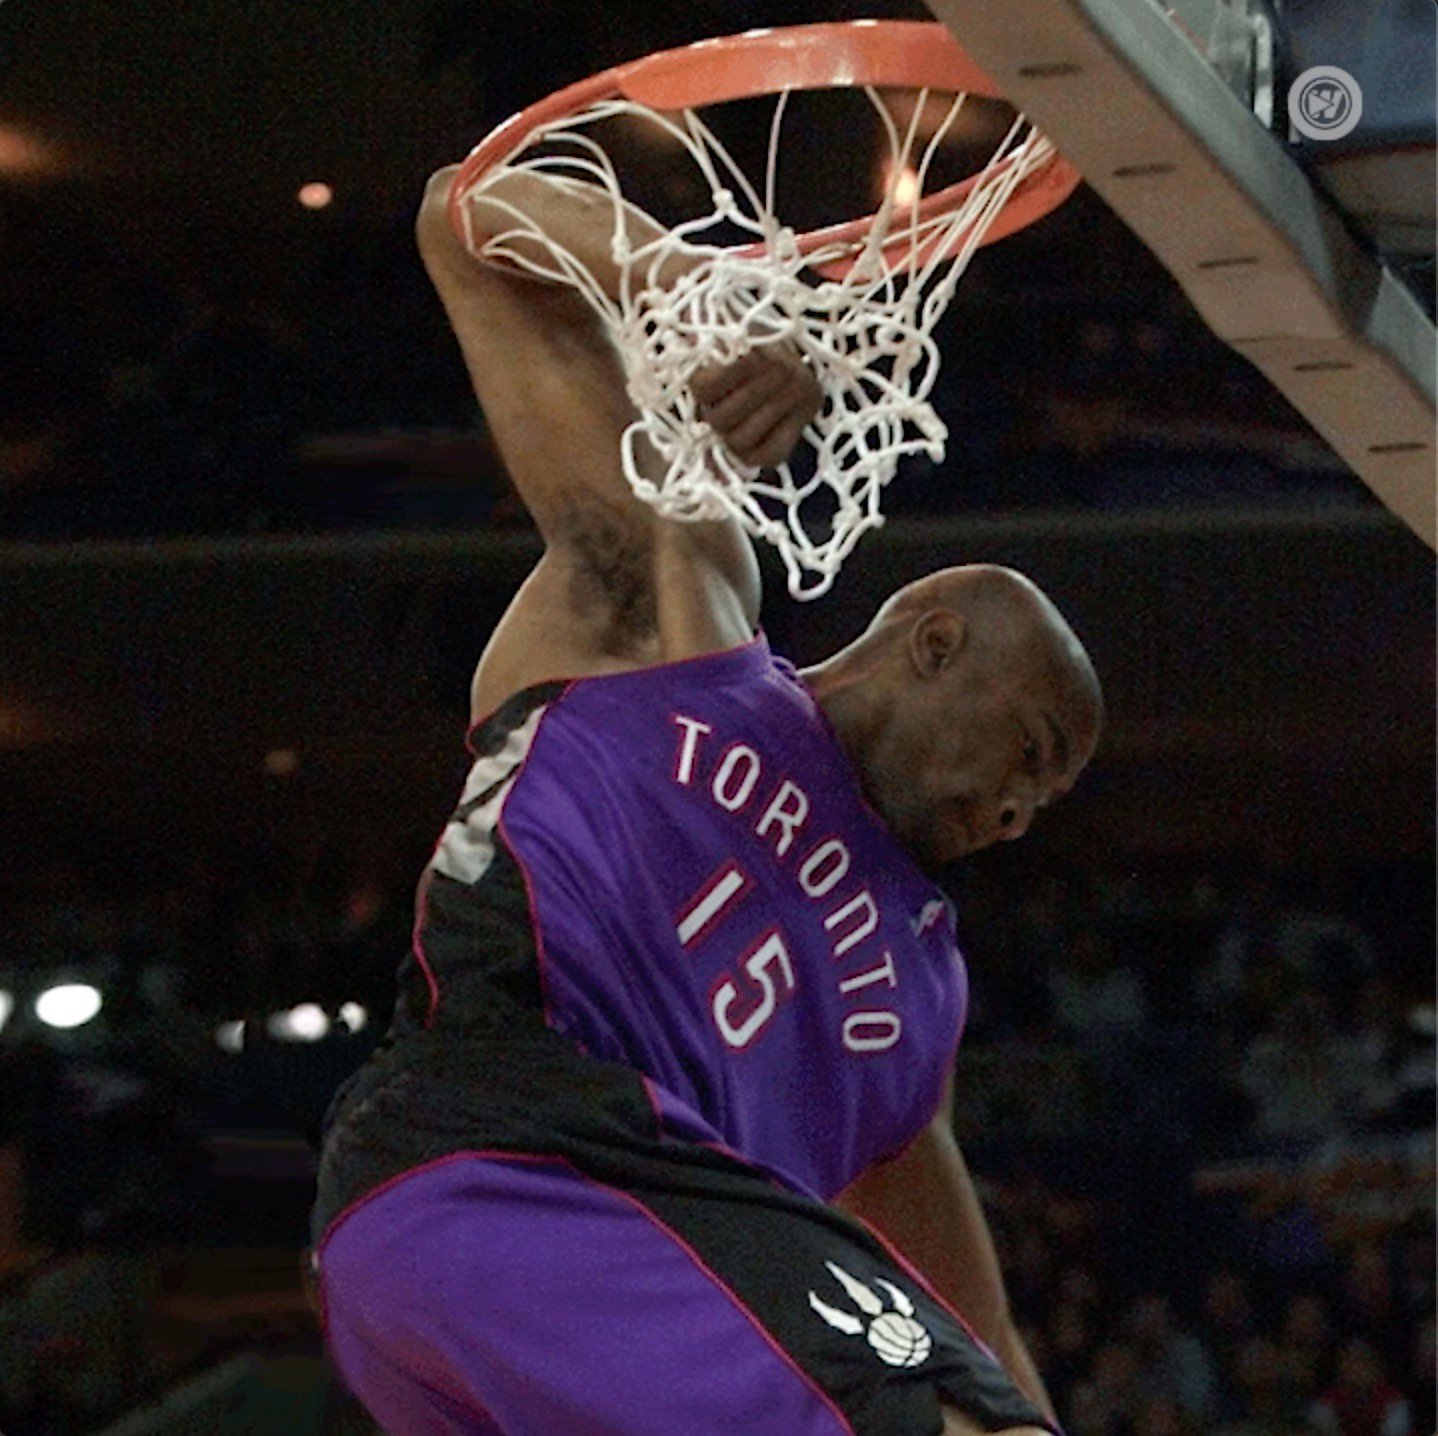 Now in retirement, Vince Carter is for everyone — not just Toronto